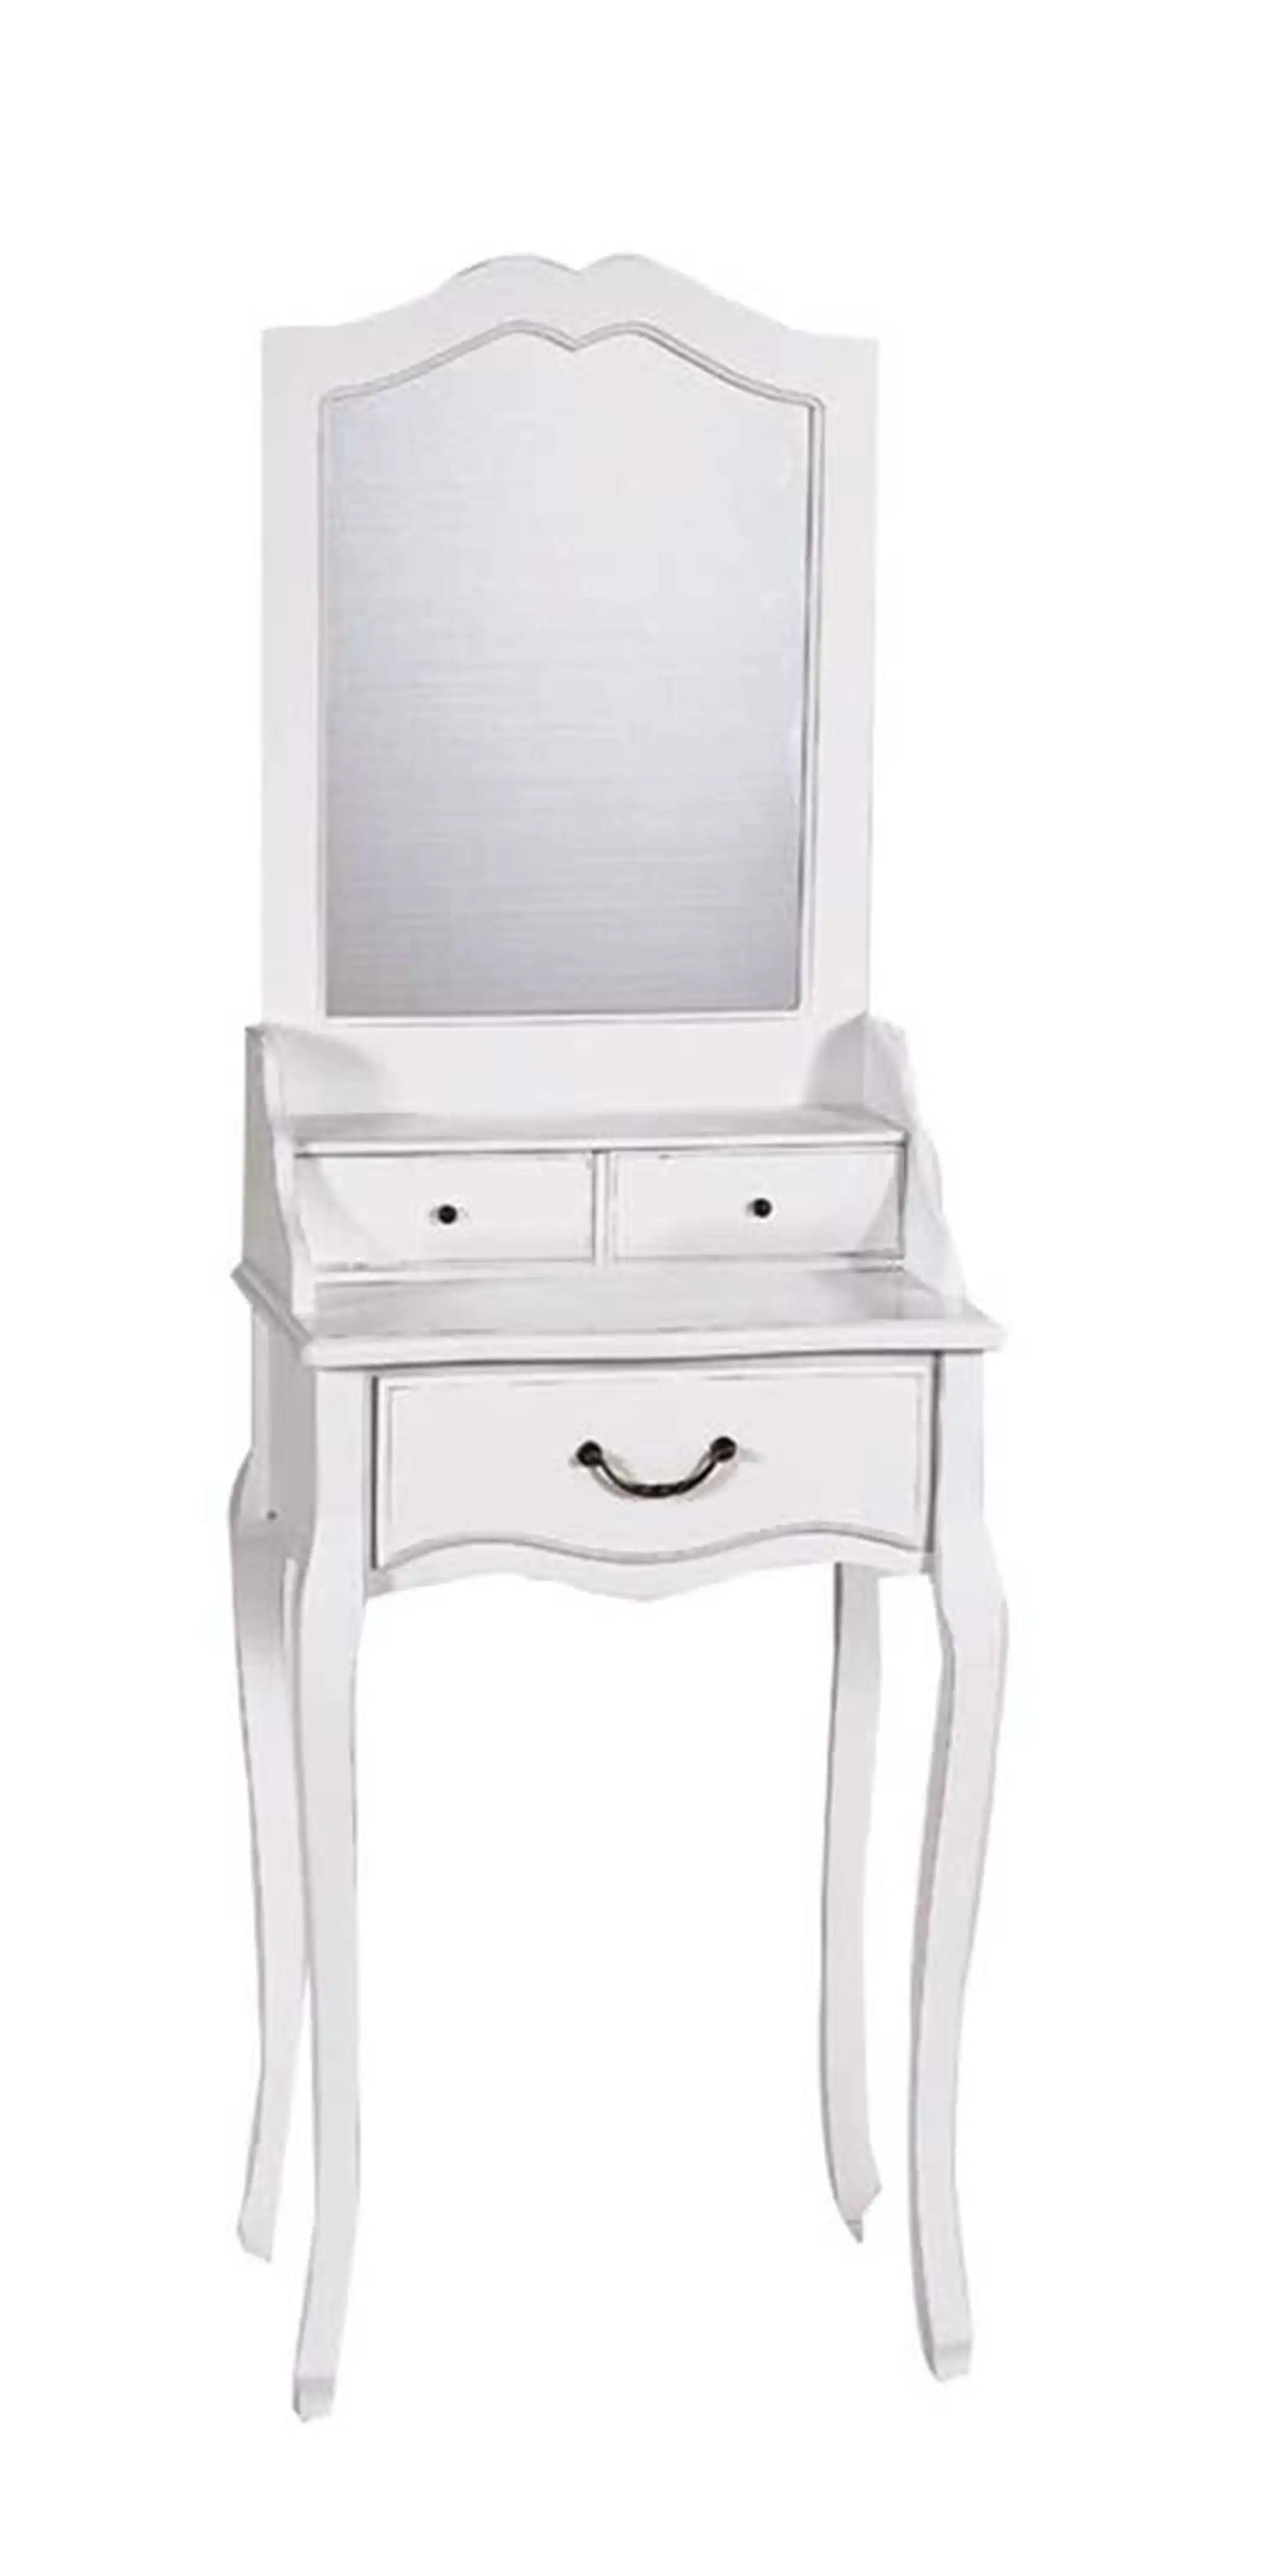 Dresser table with 3 drawers & mirror frame - popular handicrafts